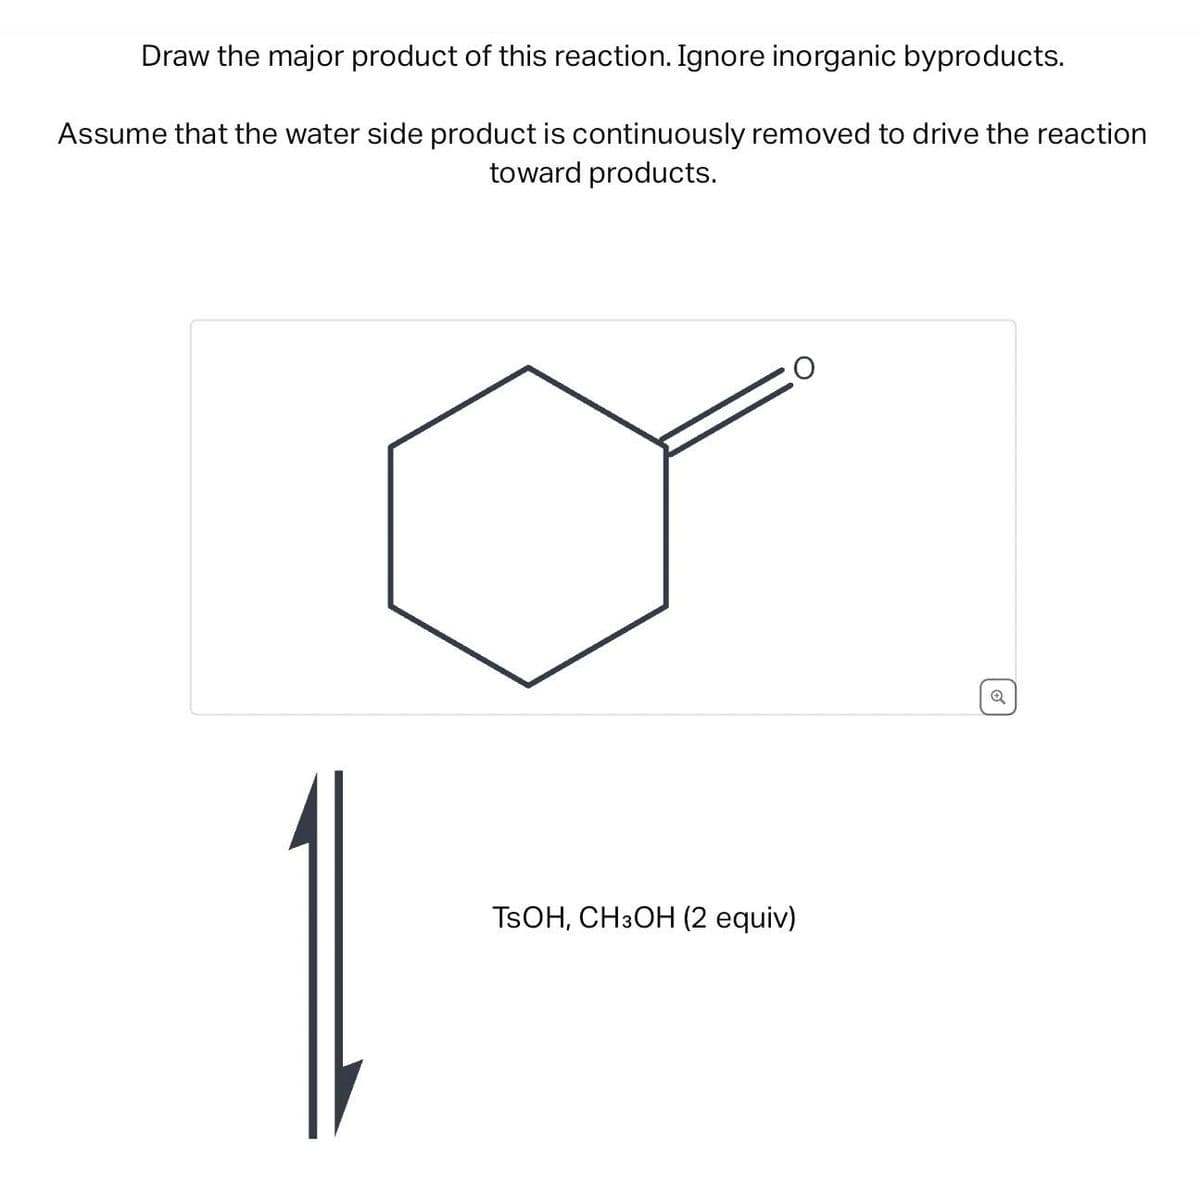 Draw the major product of this reaction. Ignore inorganic byproducts.
Assume that the water side product is continuously removed to drive the reaction
toward products.
TSOH, CH3OH (2 equiv)
Q